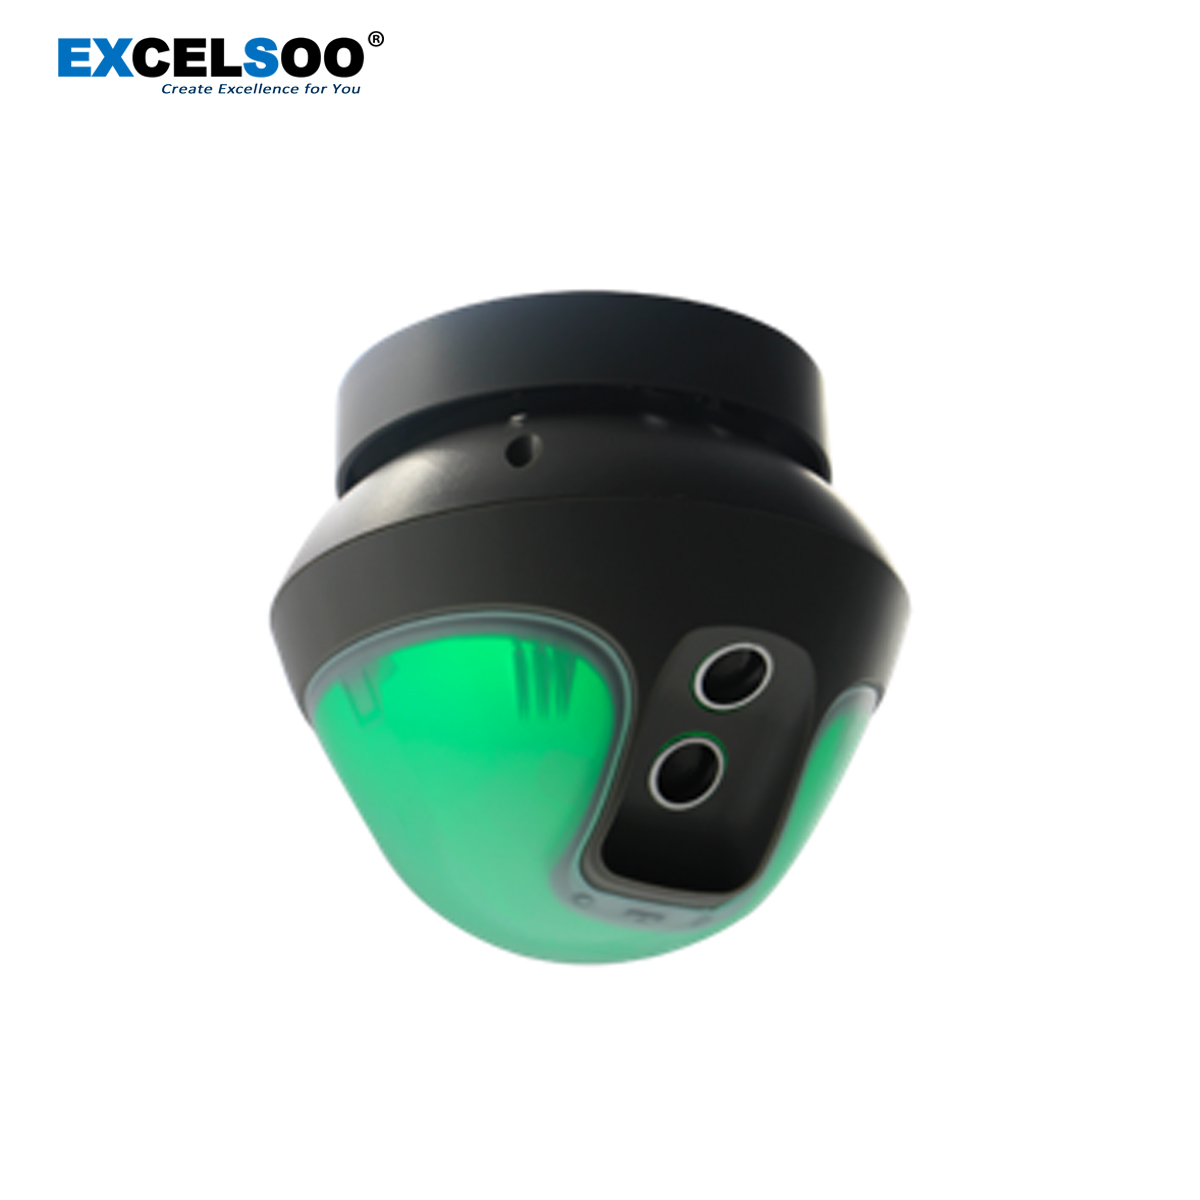 Excelsoo All In One Ultrasonic Sensor EUS-301